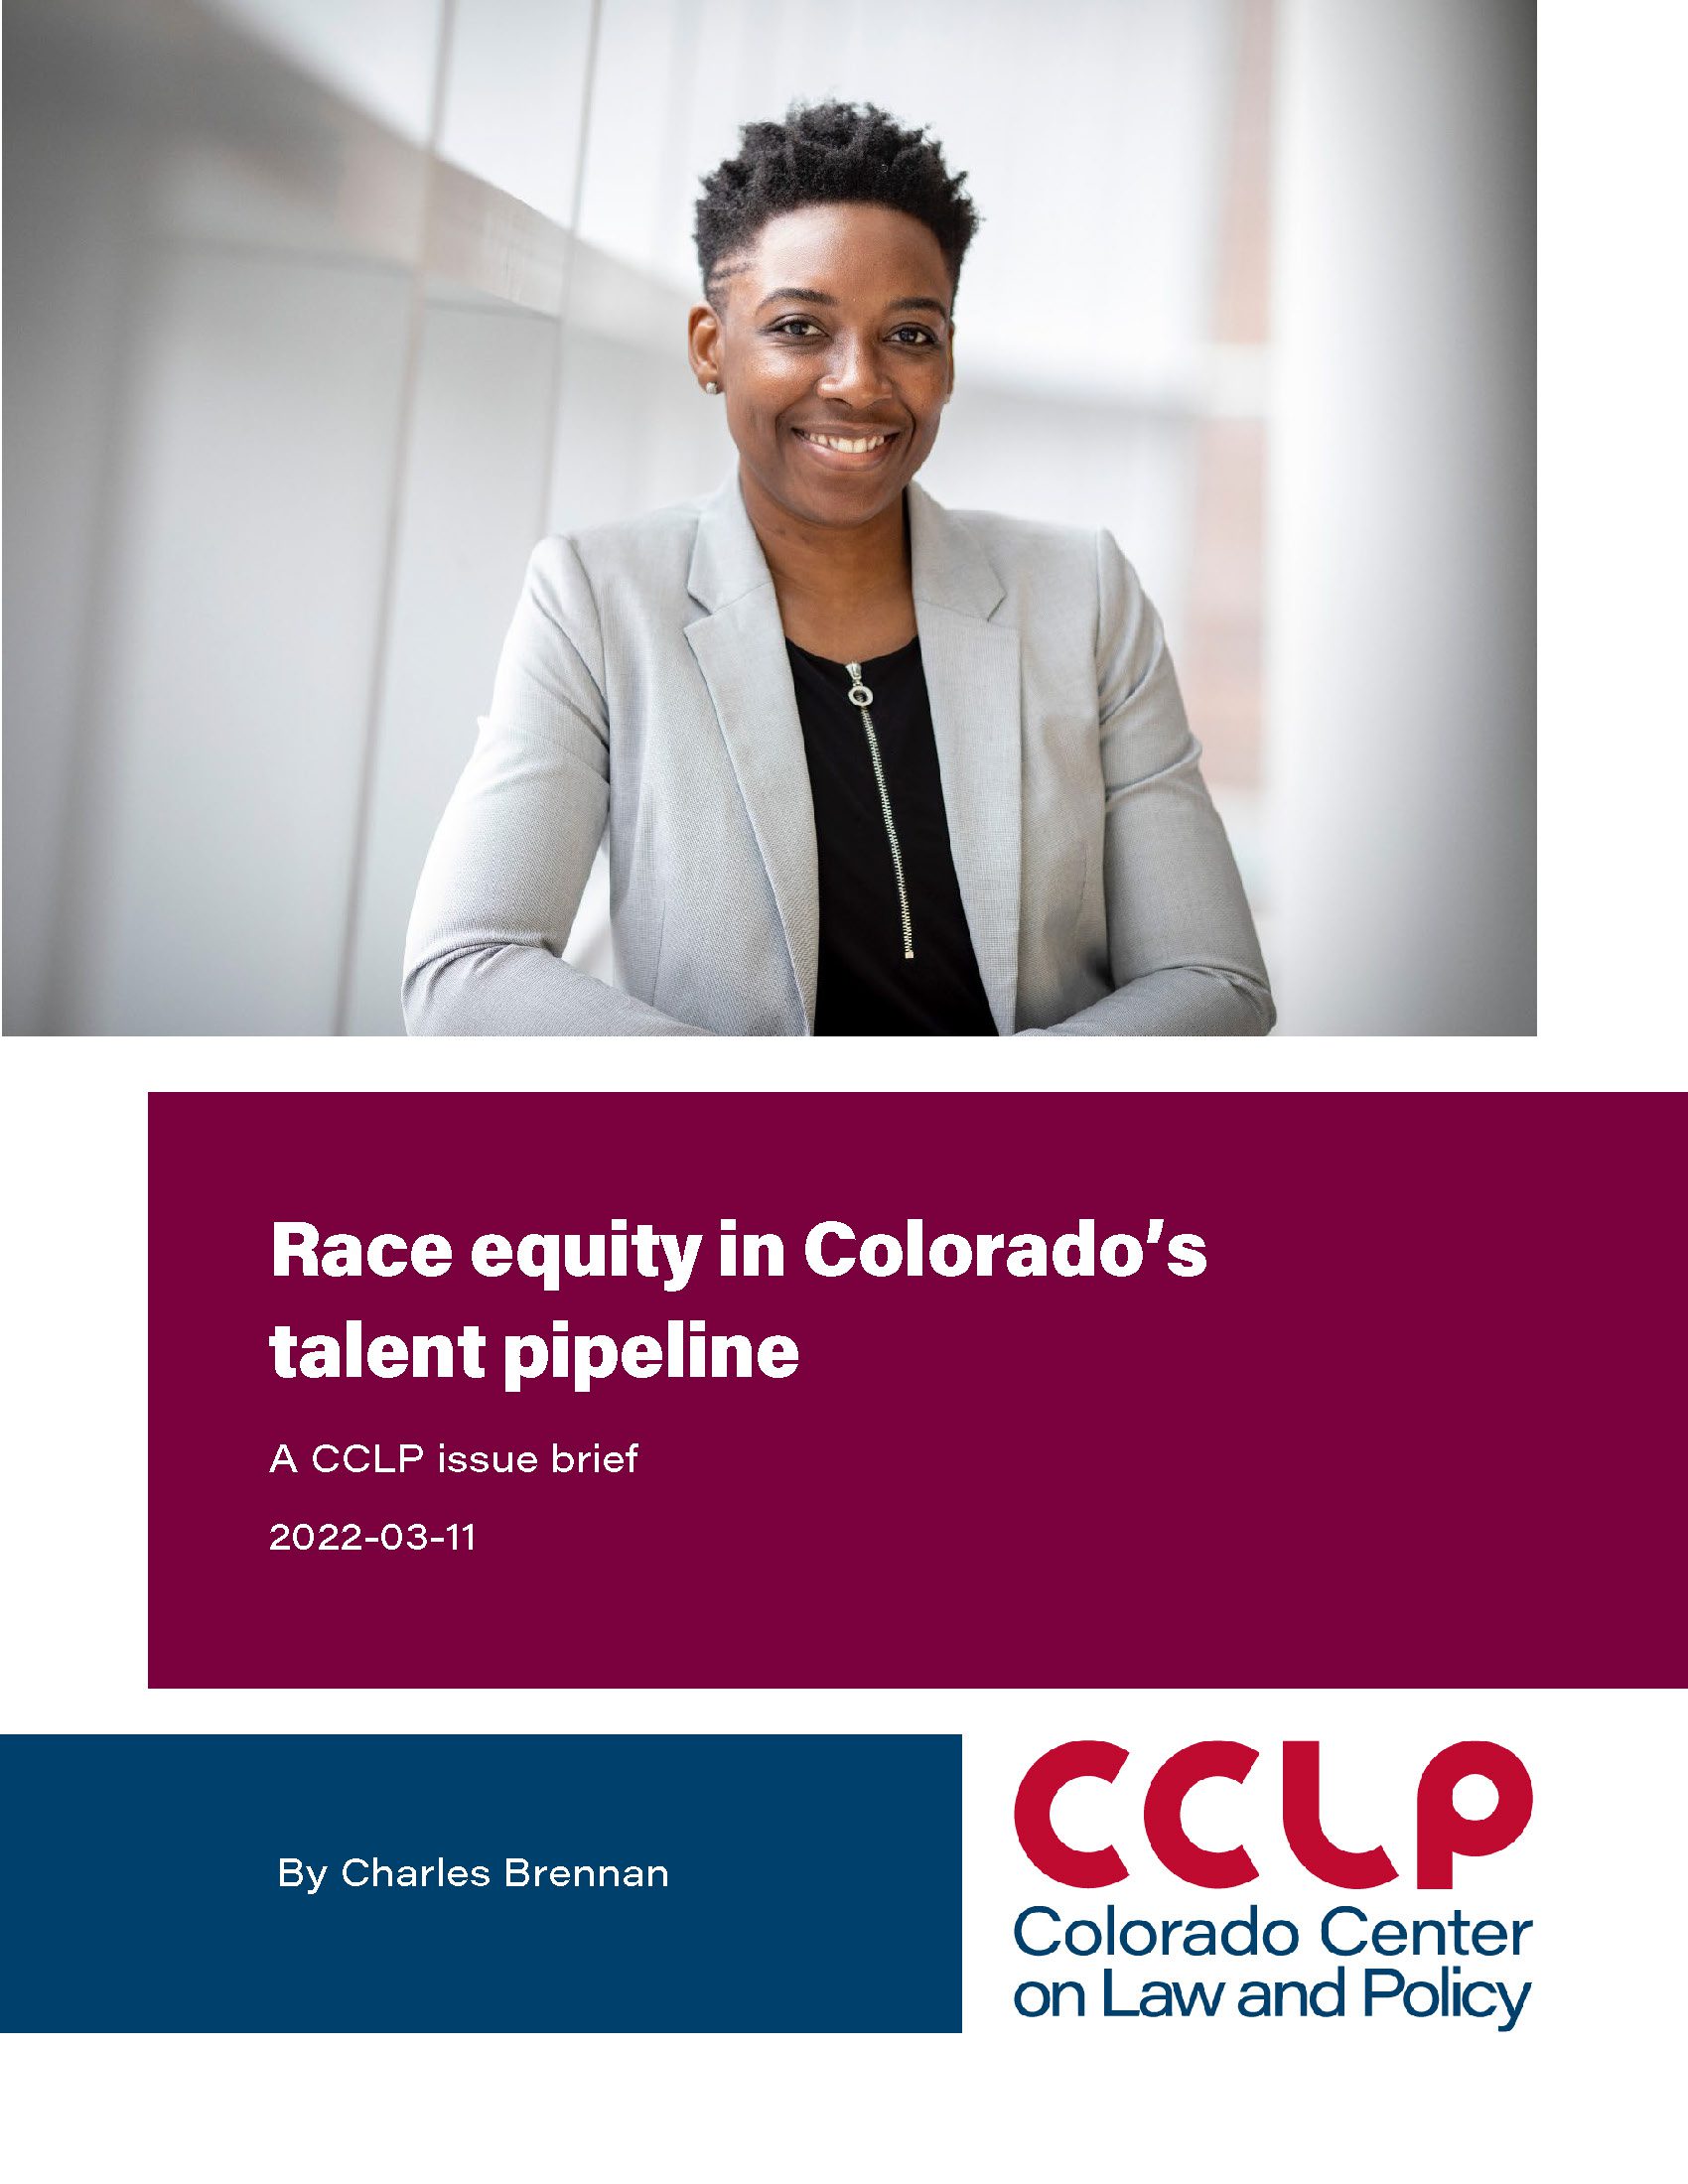 Cover image for Race Equity in Talent Pipeline Issue Brief